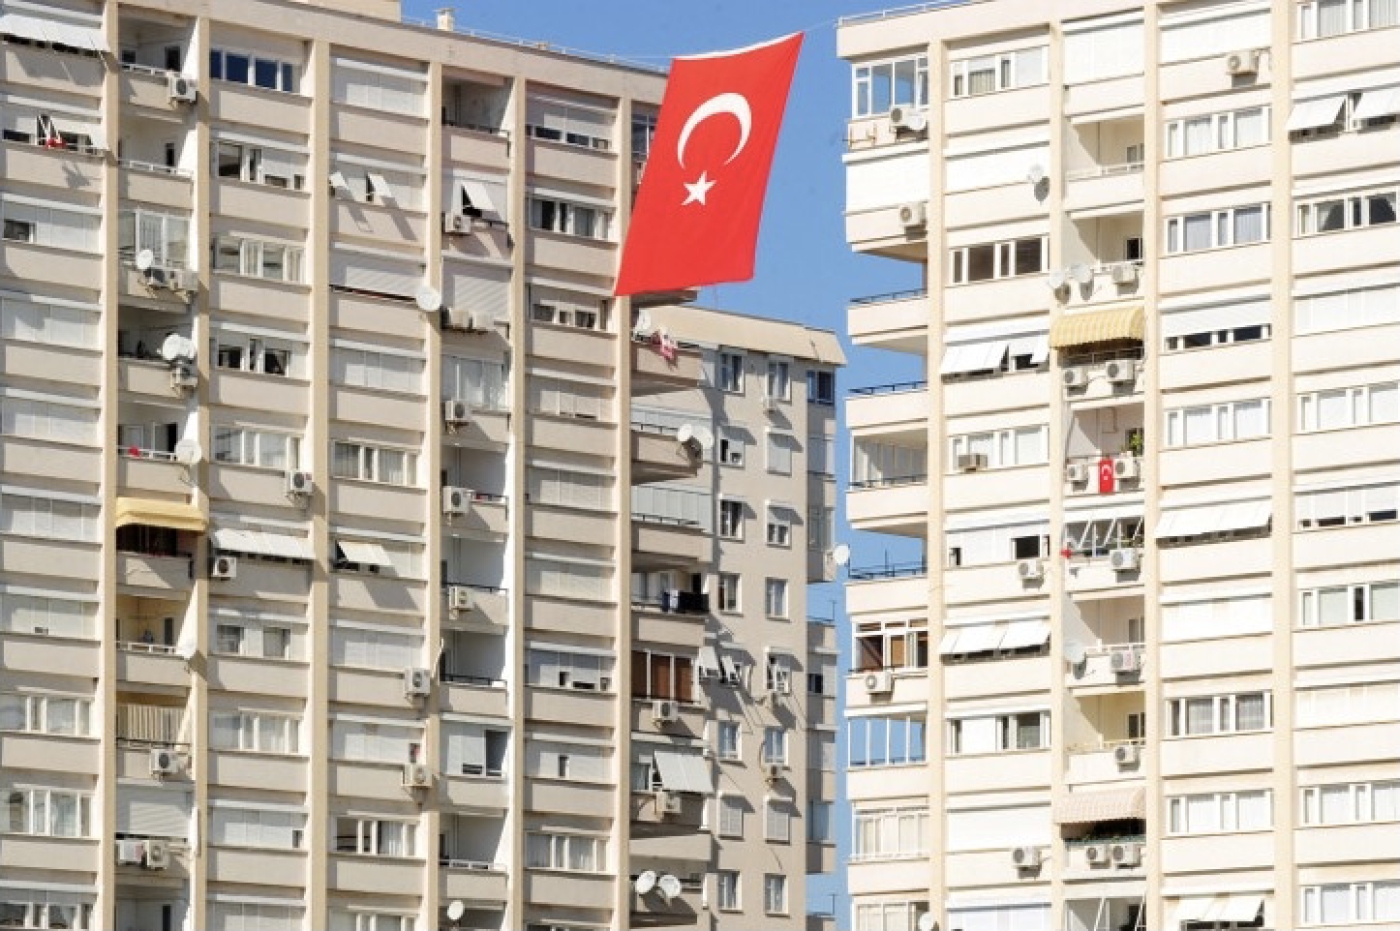 A Turkish flag flutters between apartment blocks in Antalya (File photo/AFP)